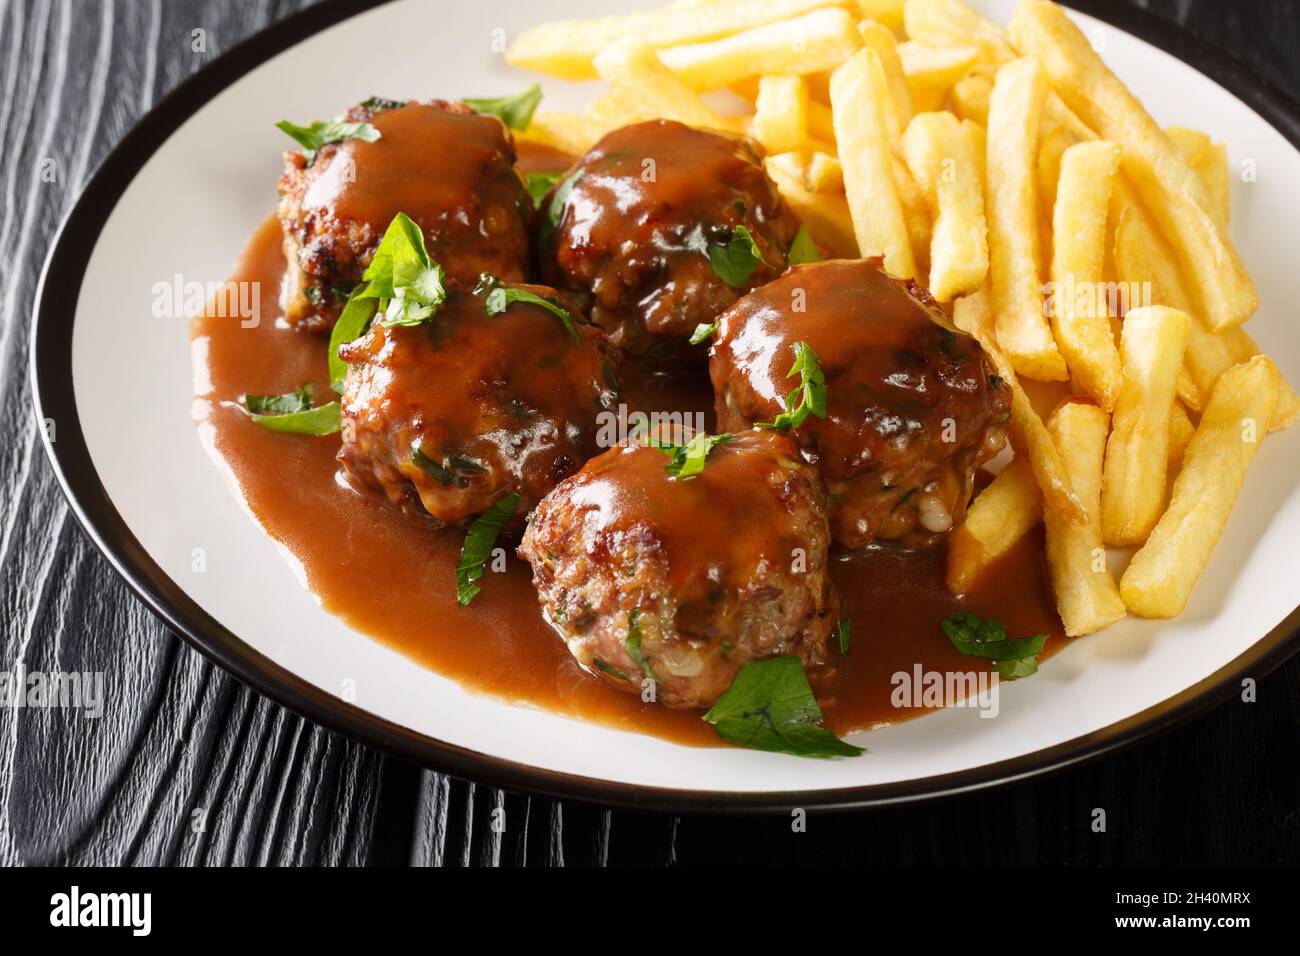 Boulets liegeois Liege Meatballs in apple sauce and French fries closeup in the plate on the table. Horizontal Stock Photo